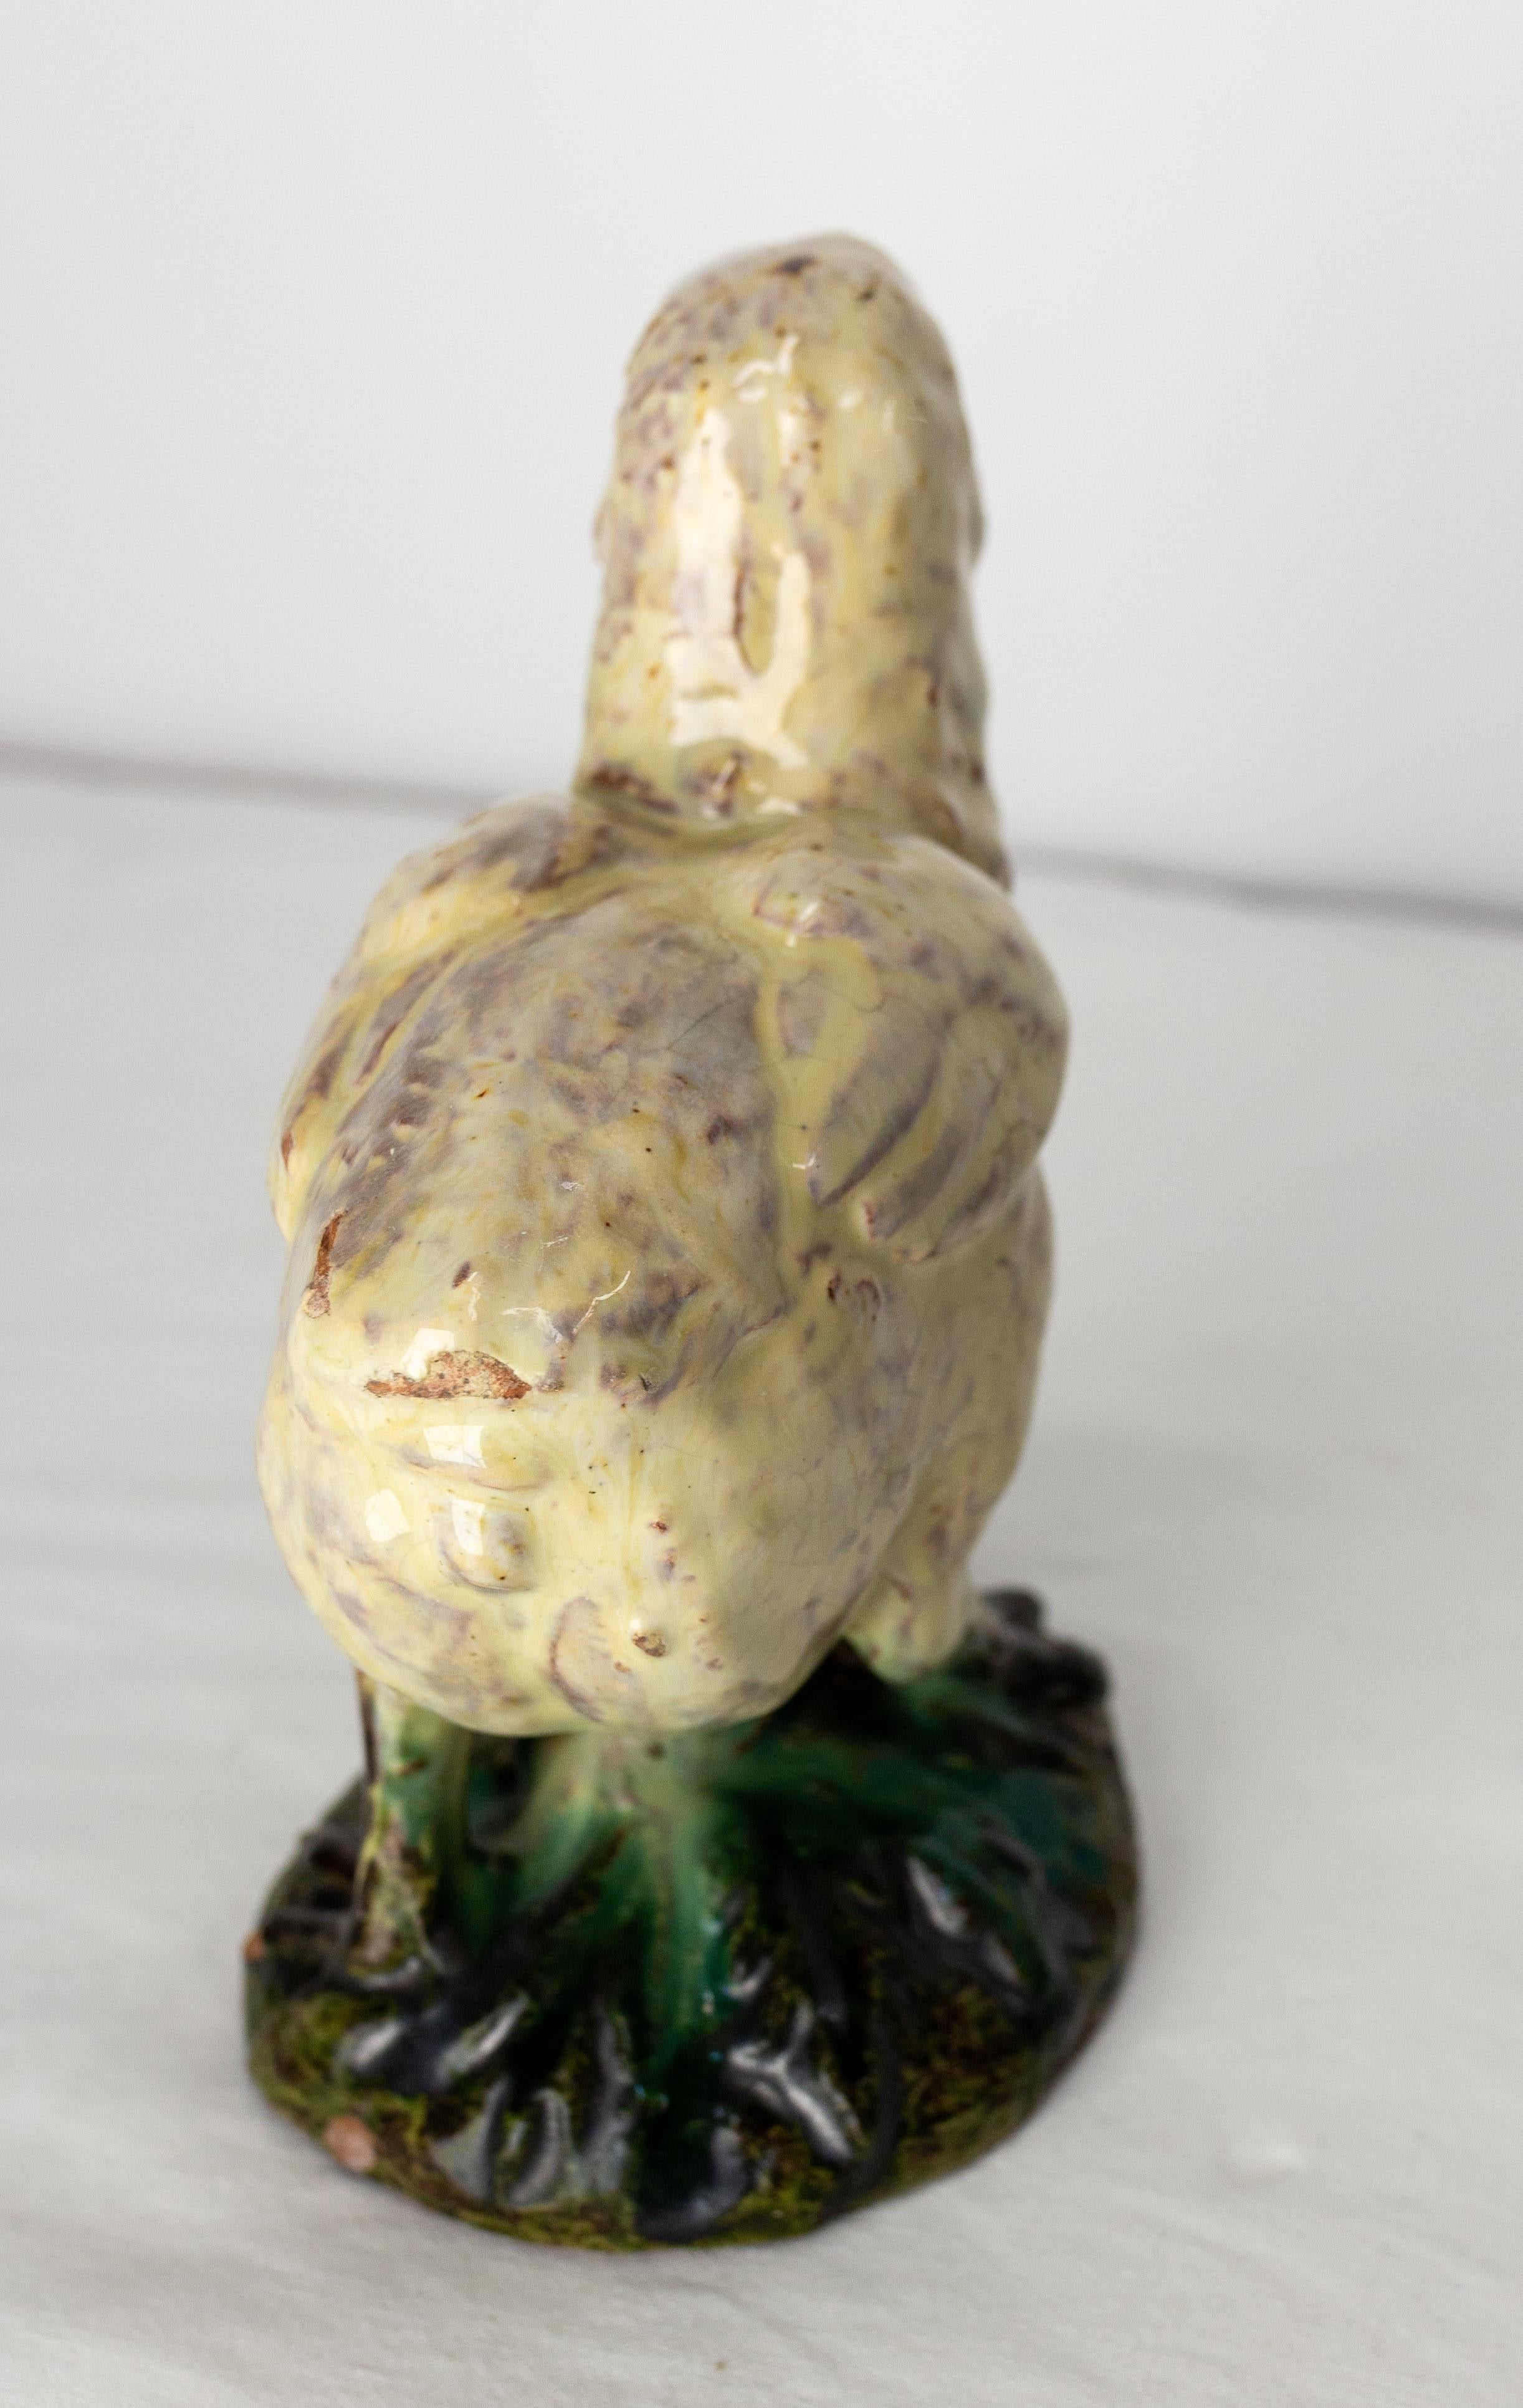 French Chick Statuette Terracotta & Faience Signed J. Filmont, circa 1900 C For Sale